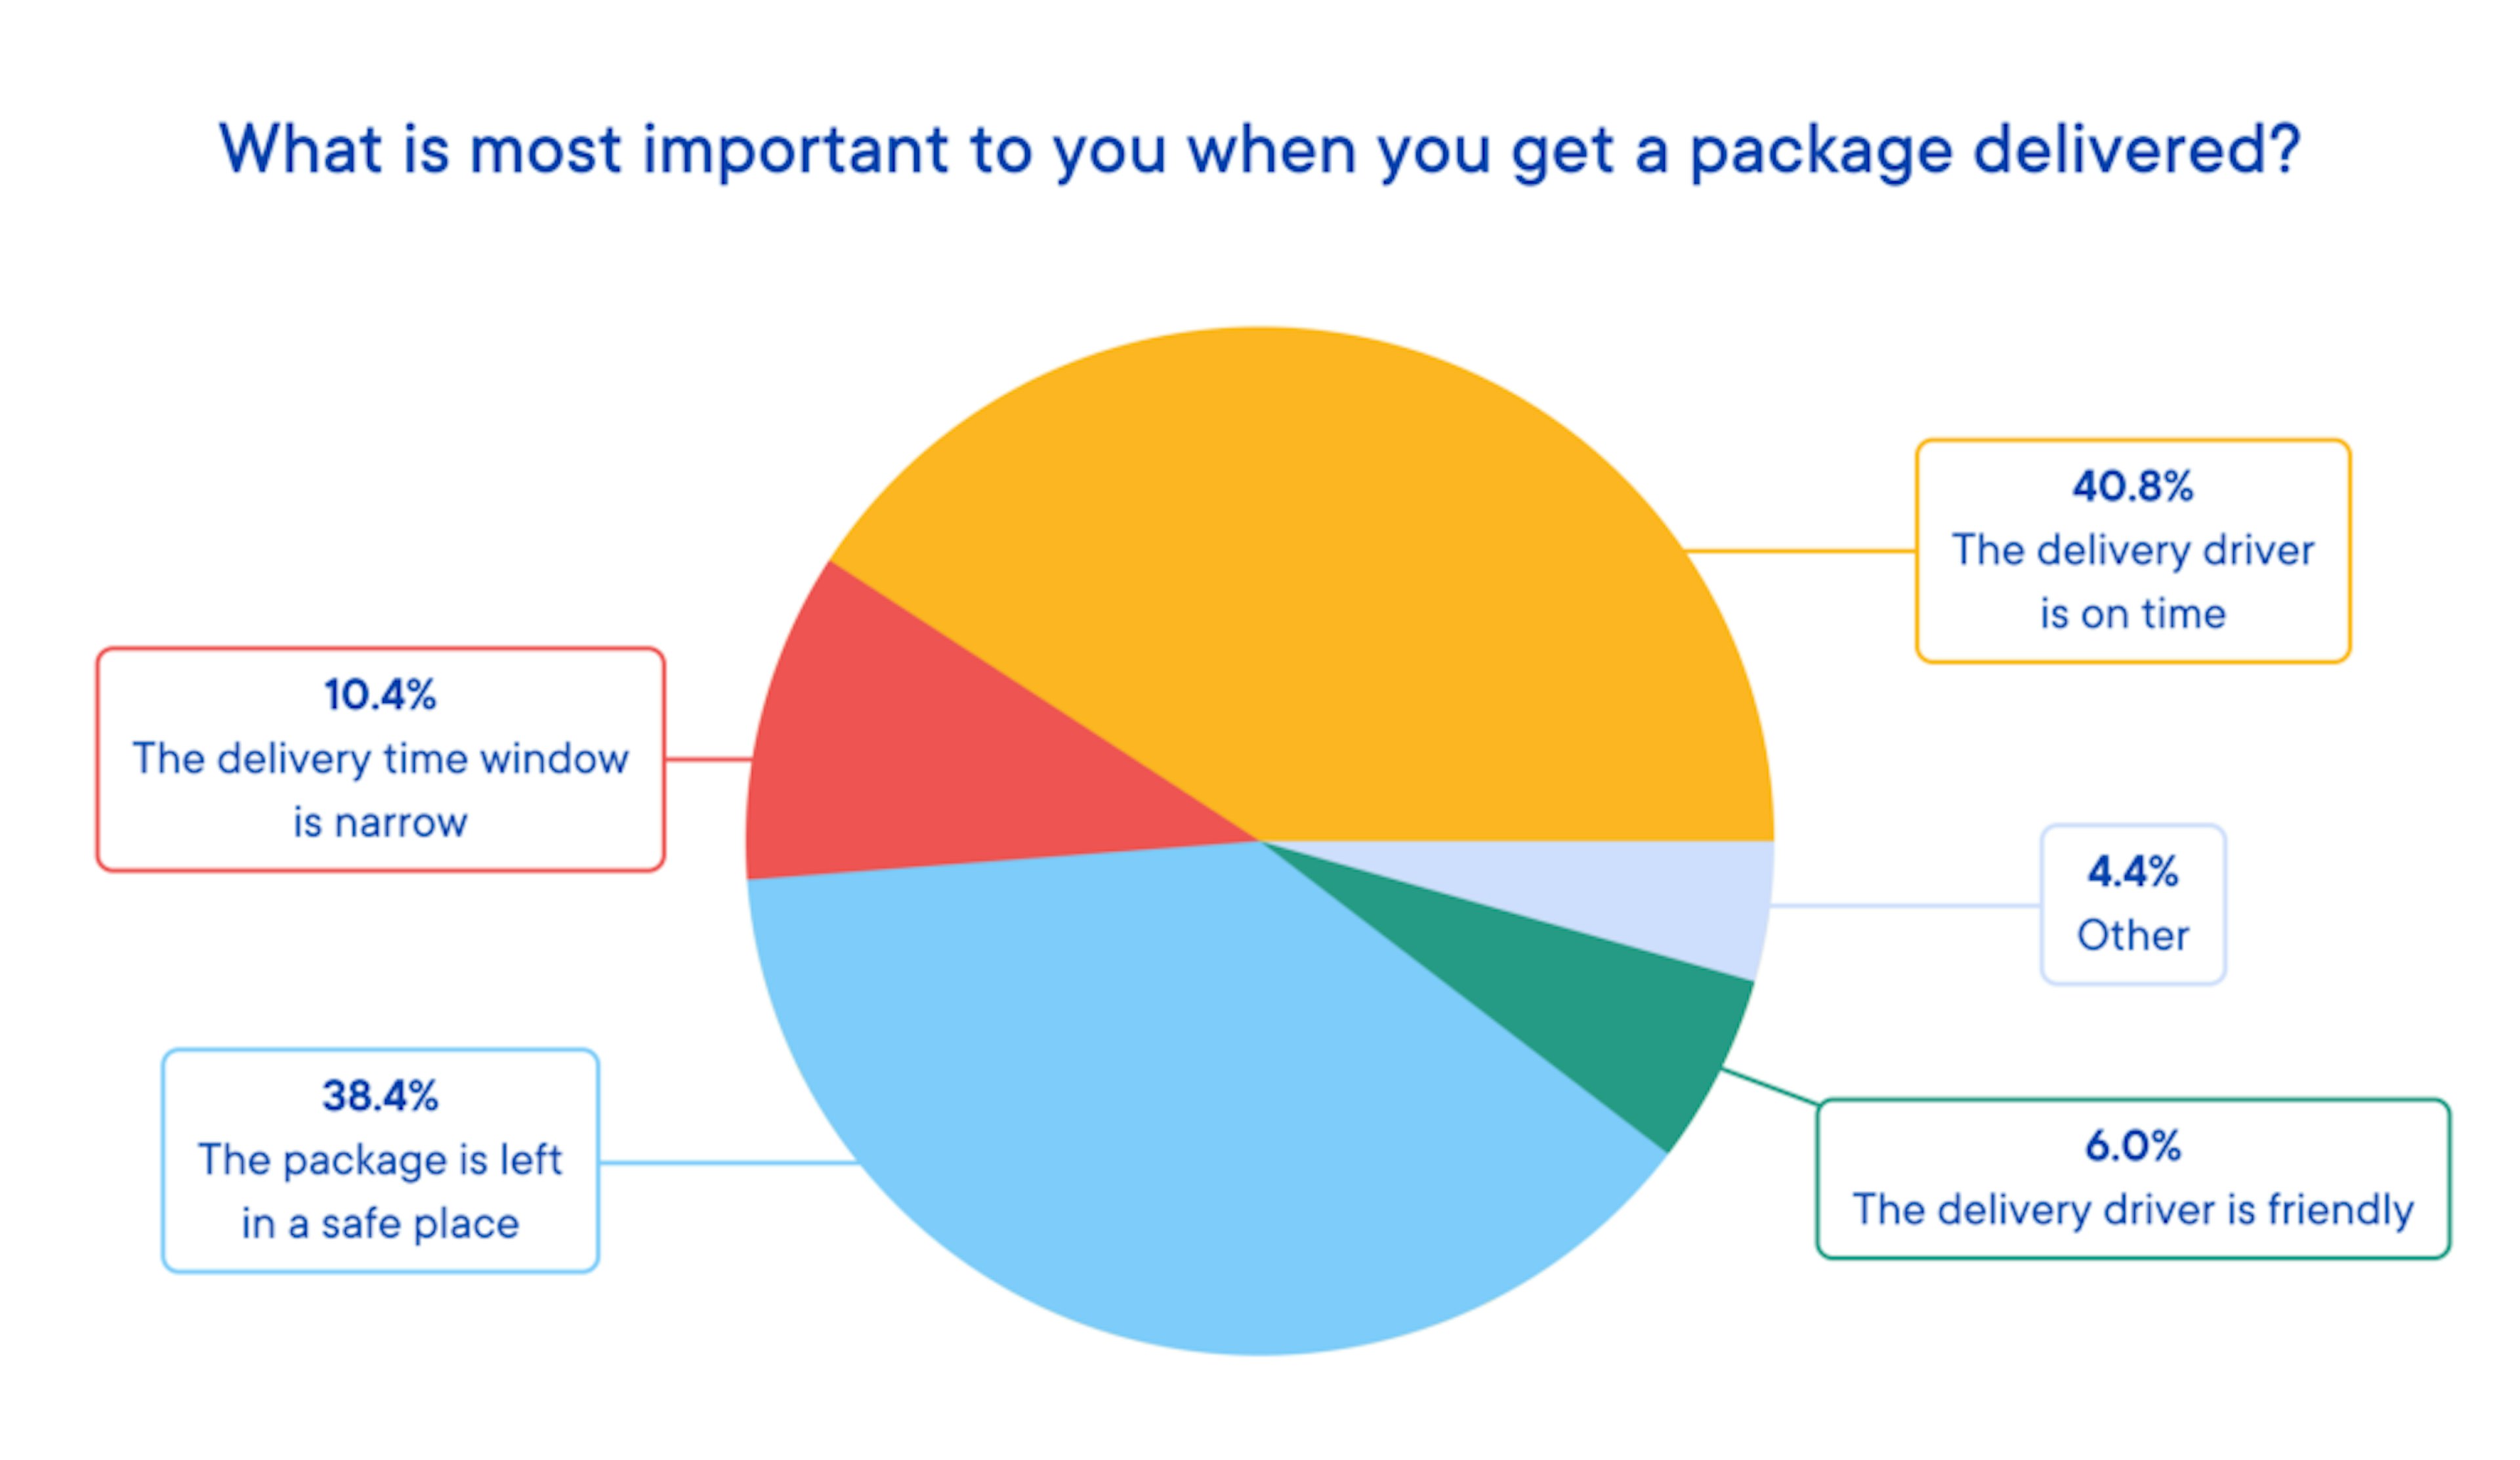 Pie chart showing the majority of respondents (40.8%) agreed that the most important thing to them was that their package was on time